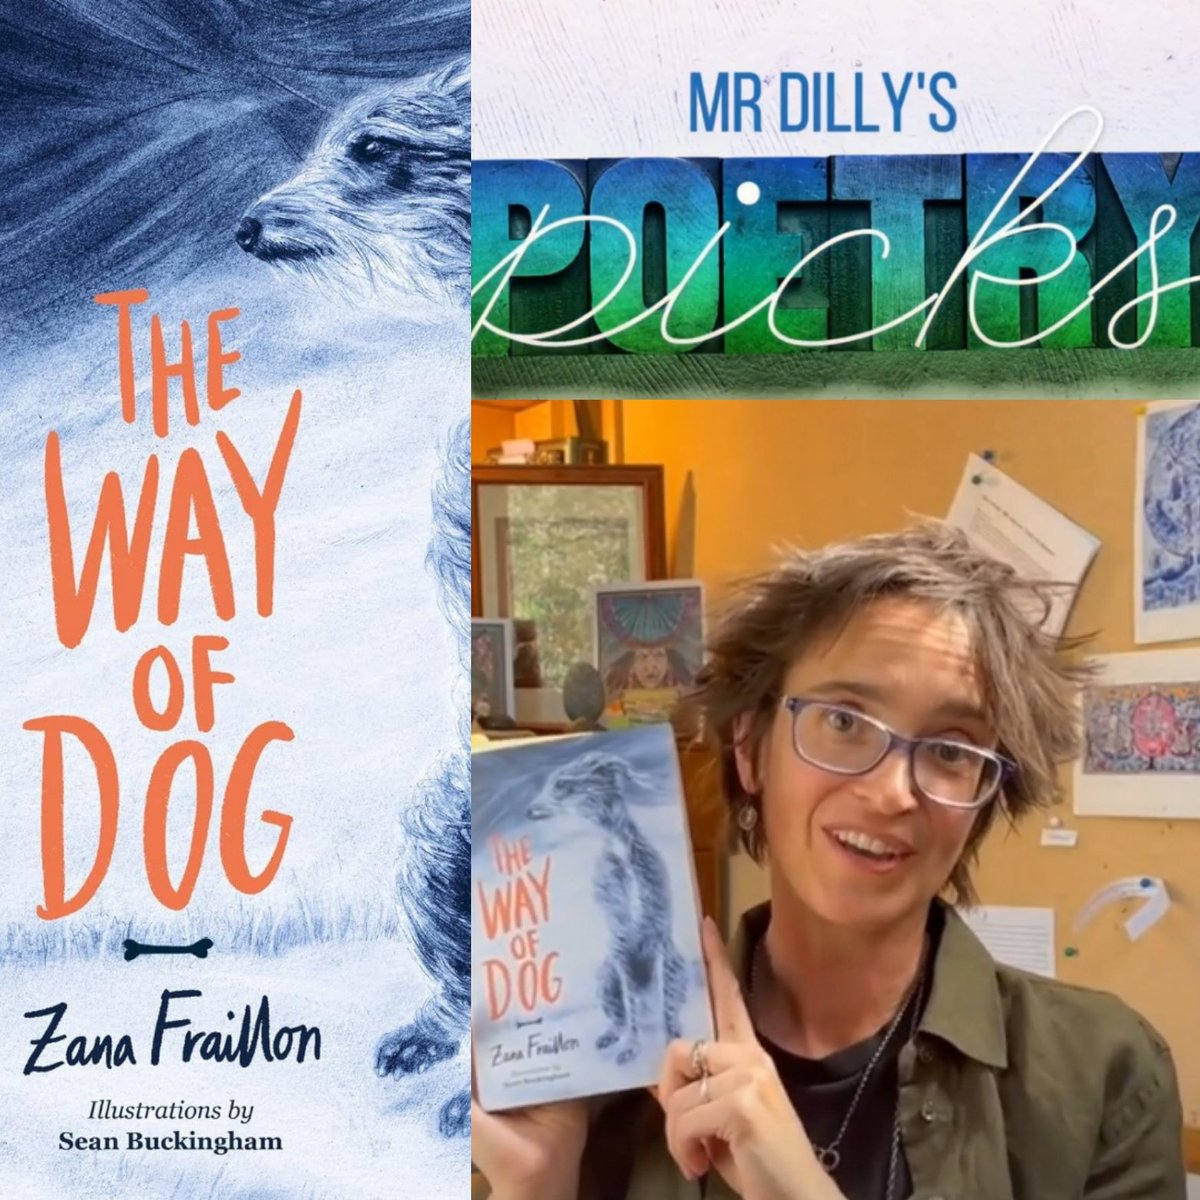 👀Catch-up ON-DEMAND with me @ZanaFraillon & more for chat💬, draw-alongs✏️, read-alouds📖, laughter🤣, learning and fun! Perfect for #schools #librarians #children & curious minds everywhere! ➡️ Watch here FREE until 8/3 tinyurl.com/mtr2vrv2 #edutwitter #BookTwitter #kidlit